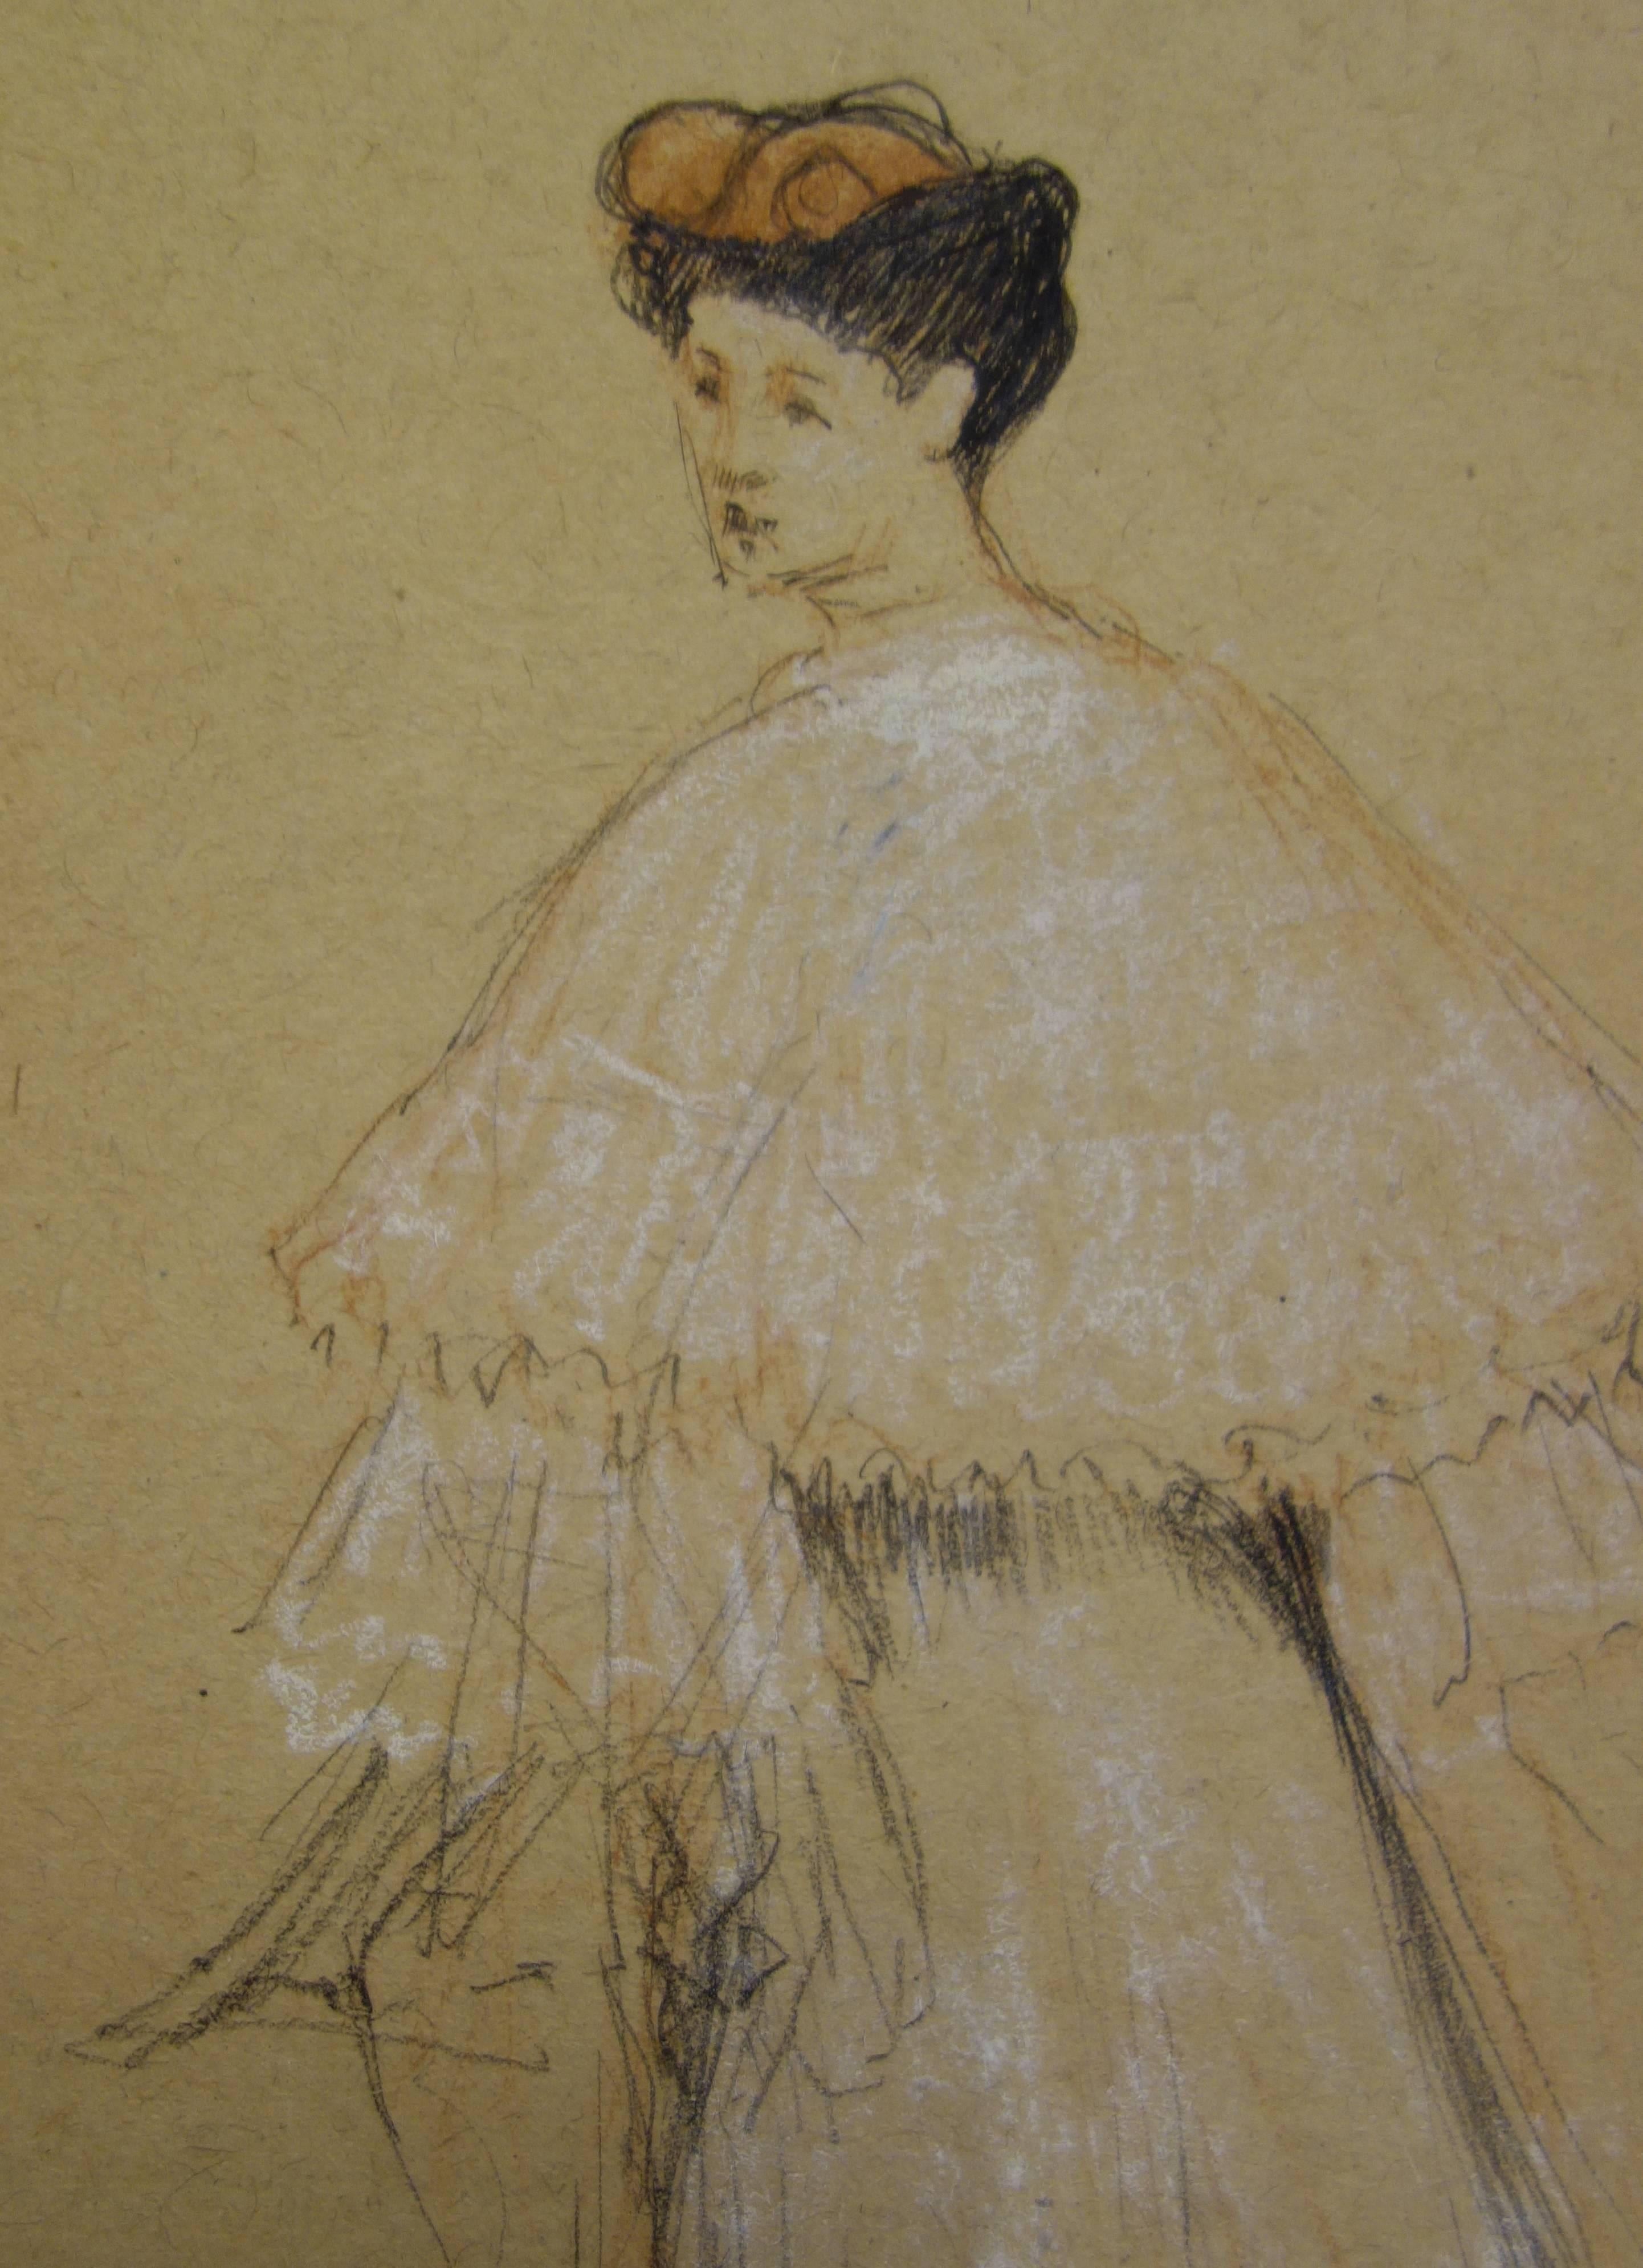 Gustave Poetzsch (1870-1950) 
Woman in 1900s Dress, 1900

Original charcoals and pencil drawing
Signed and dated bottom right
Stamp of the Estate auction sale on the back
On ocher tinted vellum 26 x 16 cm (c. 10 x 6 in)

Very good